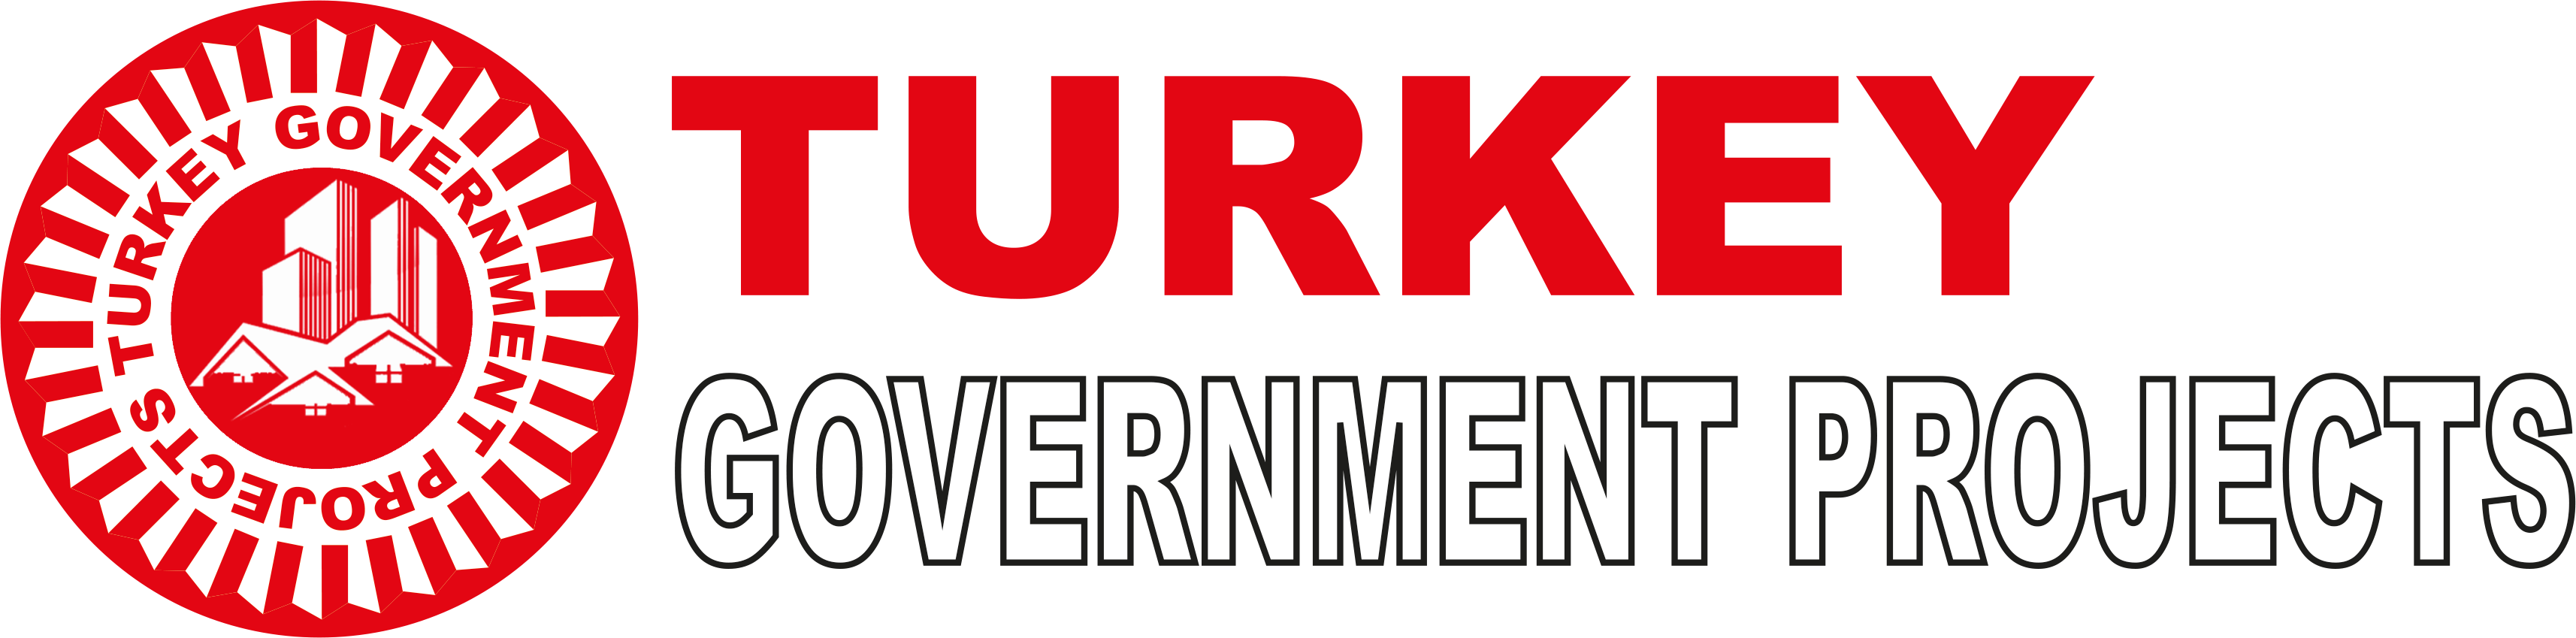 Turkey Government Projects